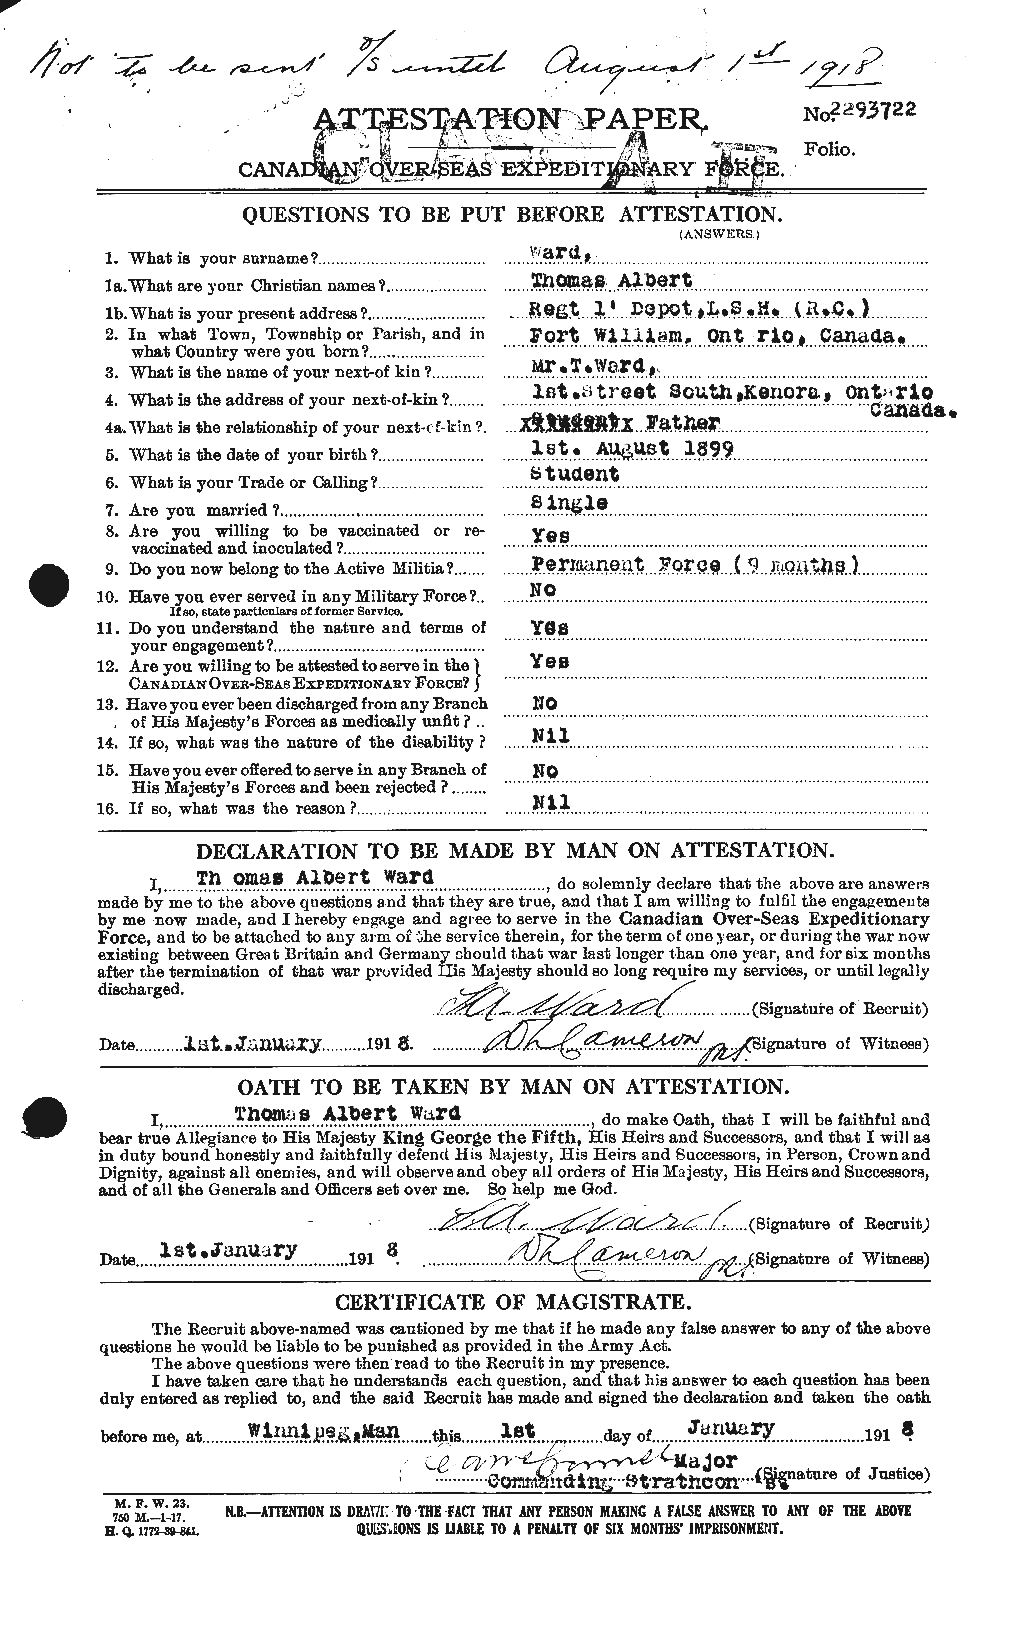 Personnel Records of the First World War - CEF 659720a